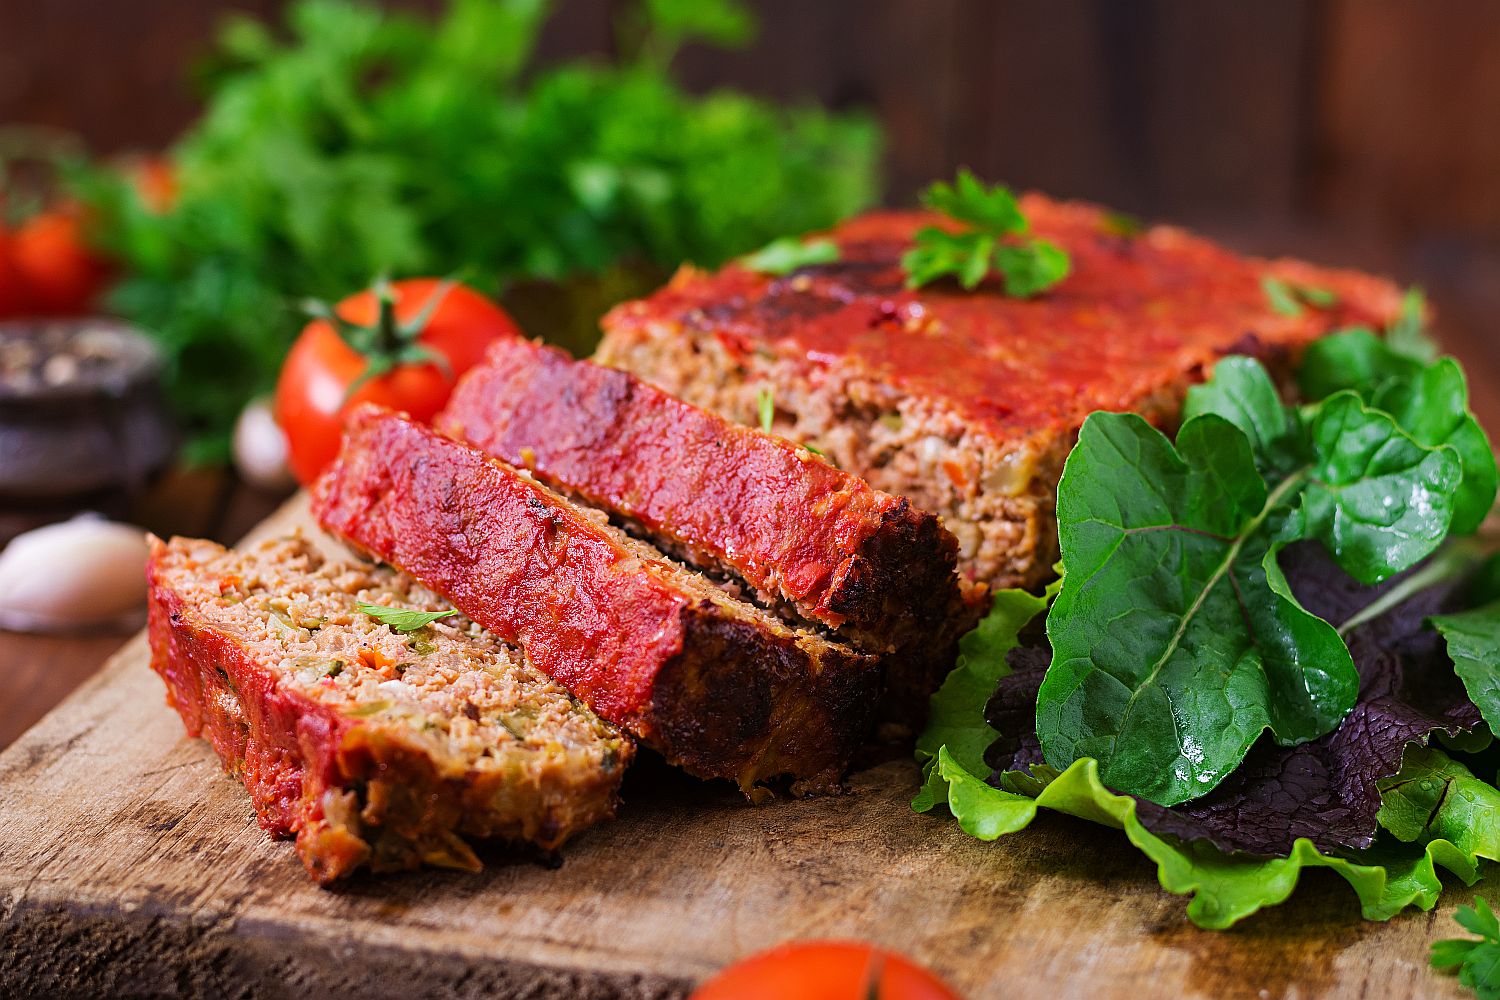 Homemade meatloaf with savory topping on wooden board